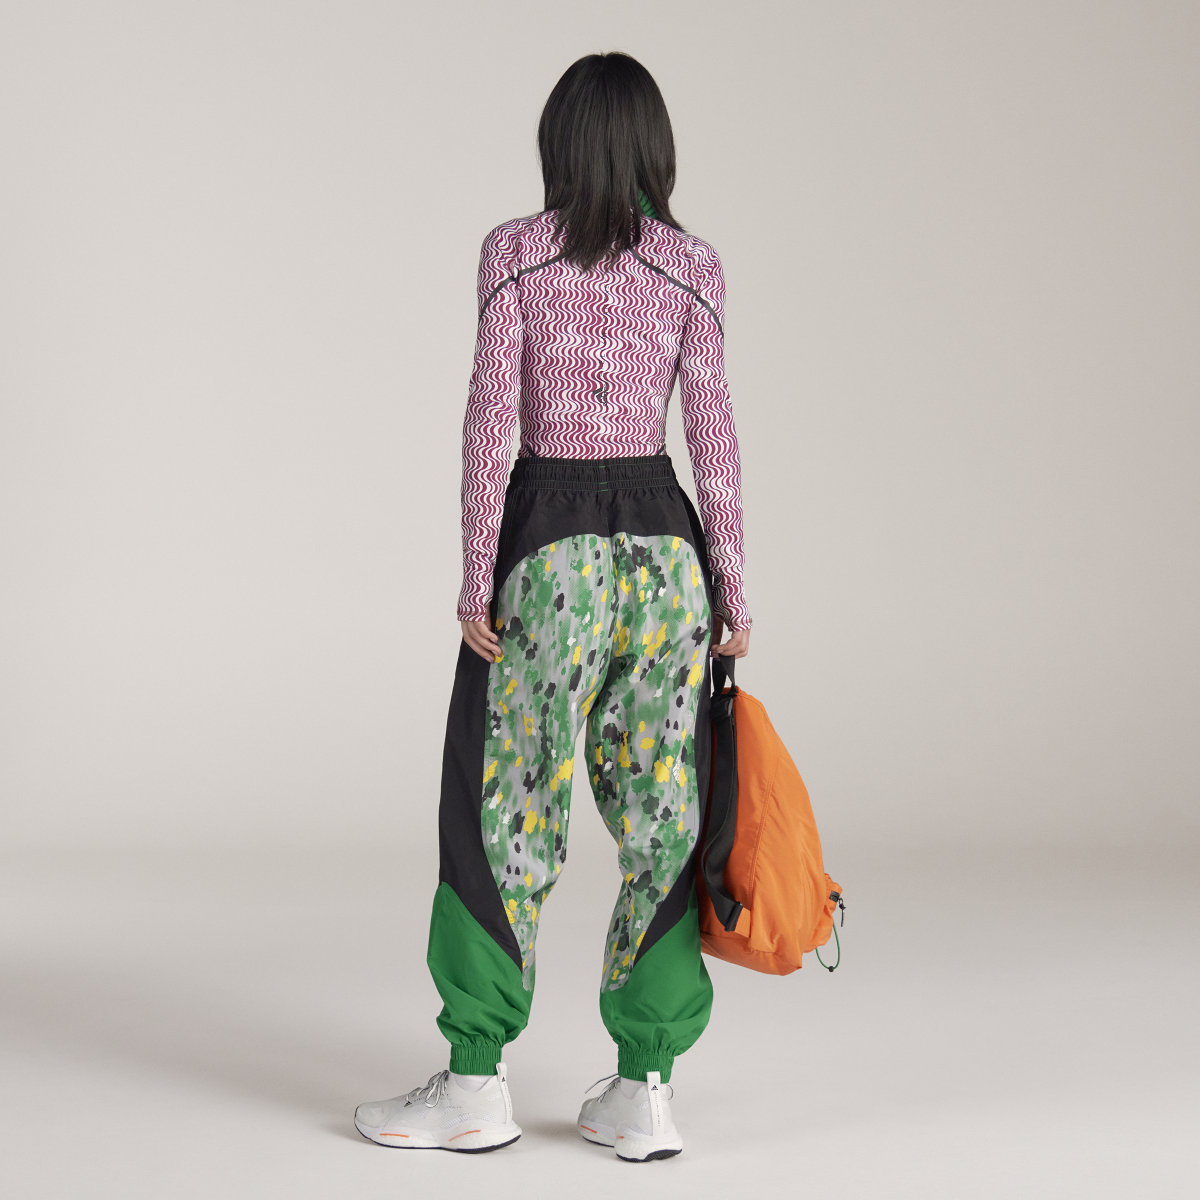 Adidas by Stella McCartney Printed Woven Tracksuit Bottoms. 5